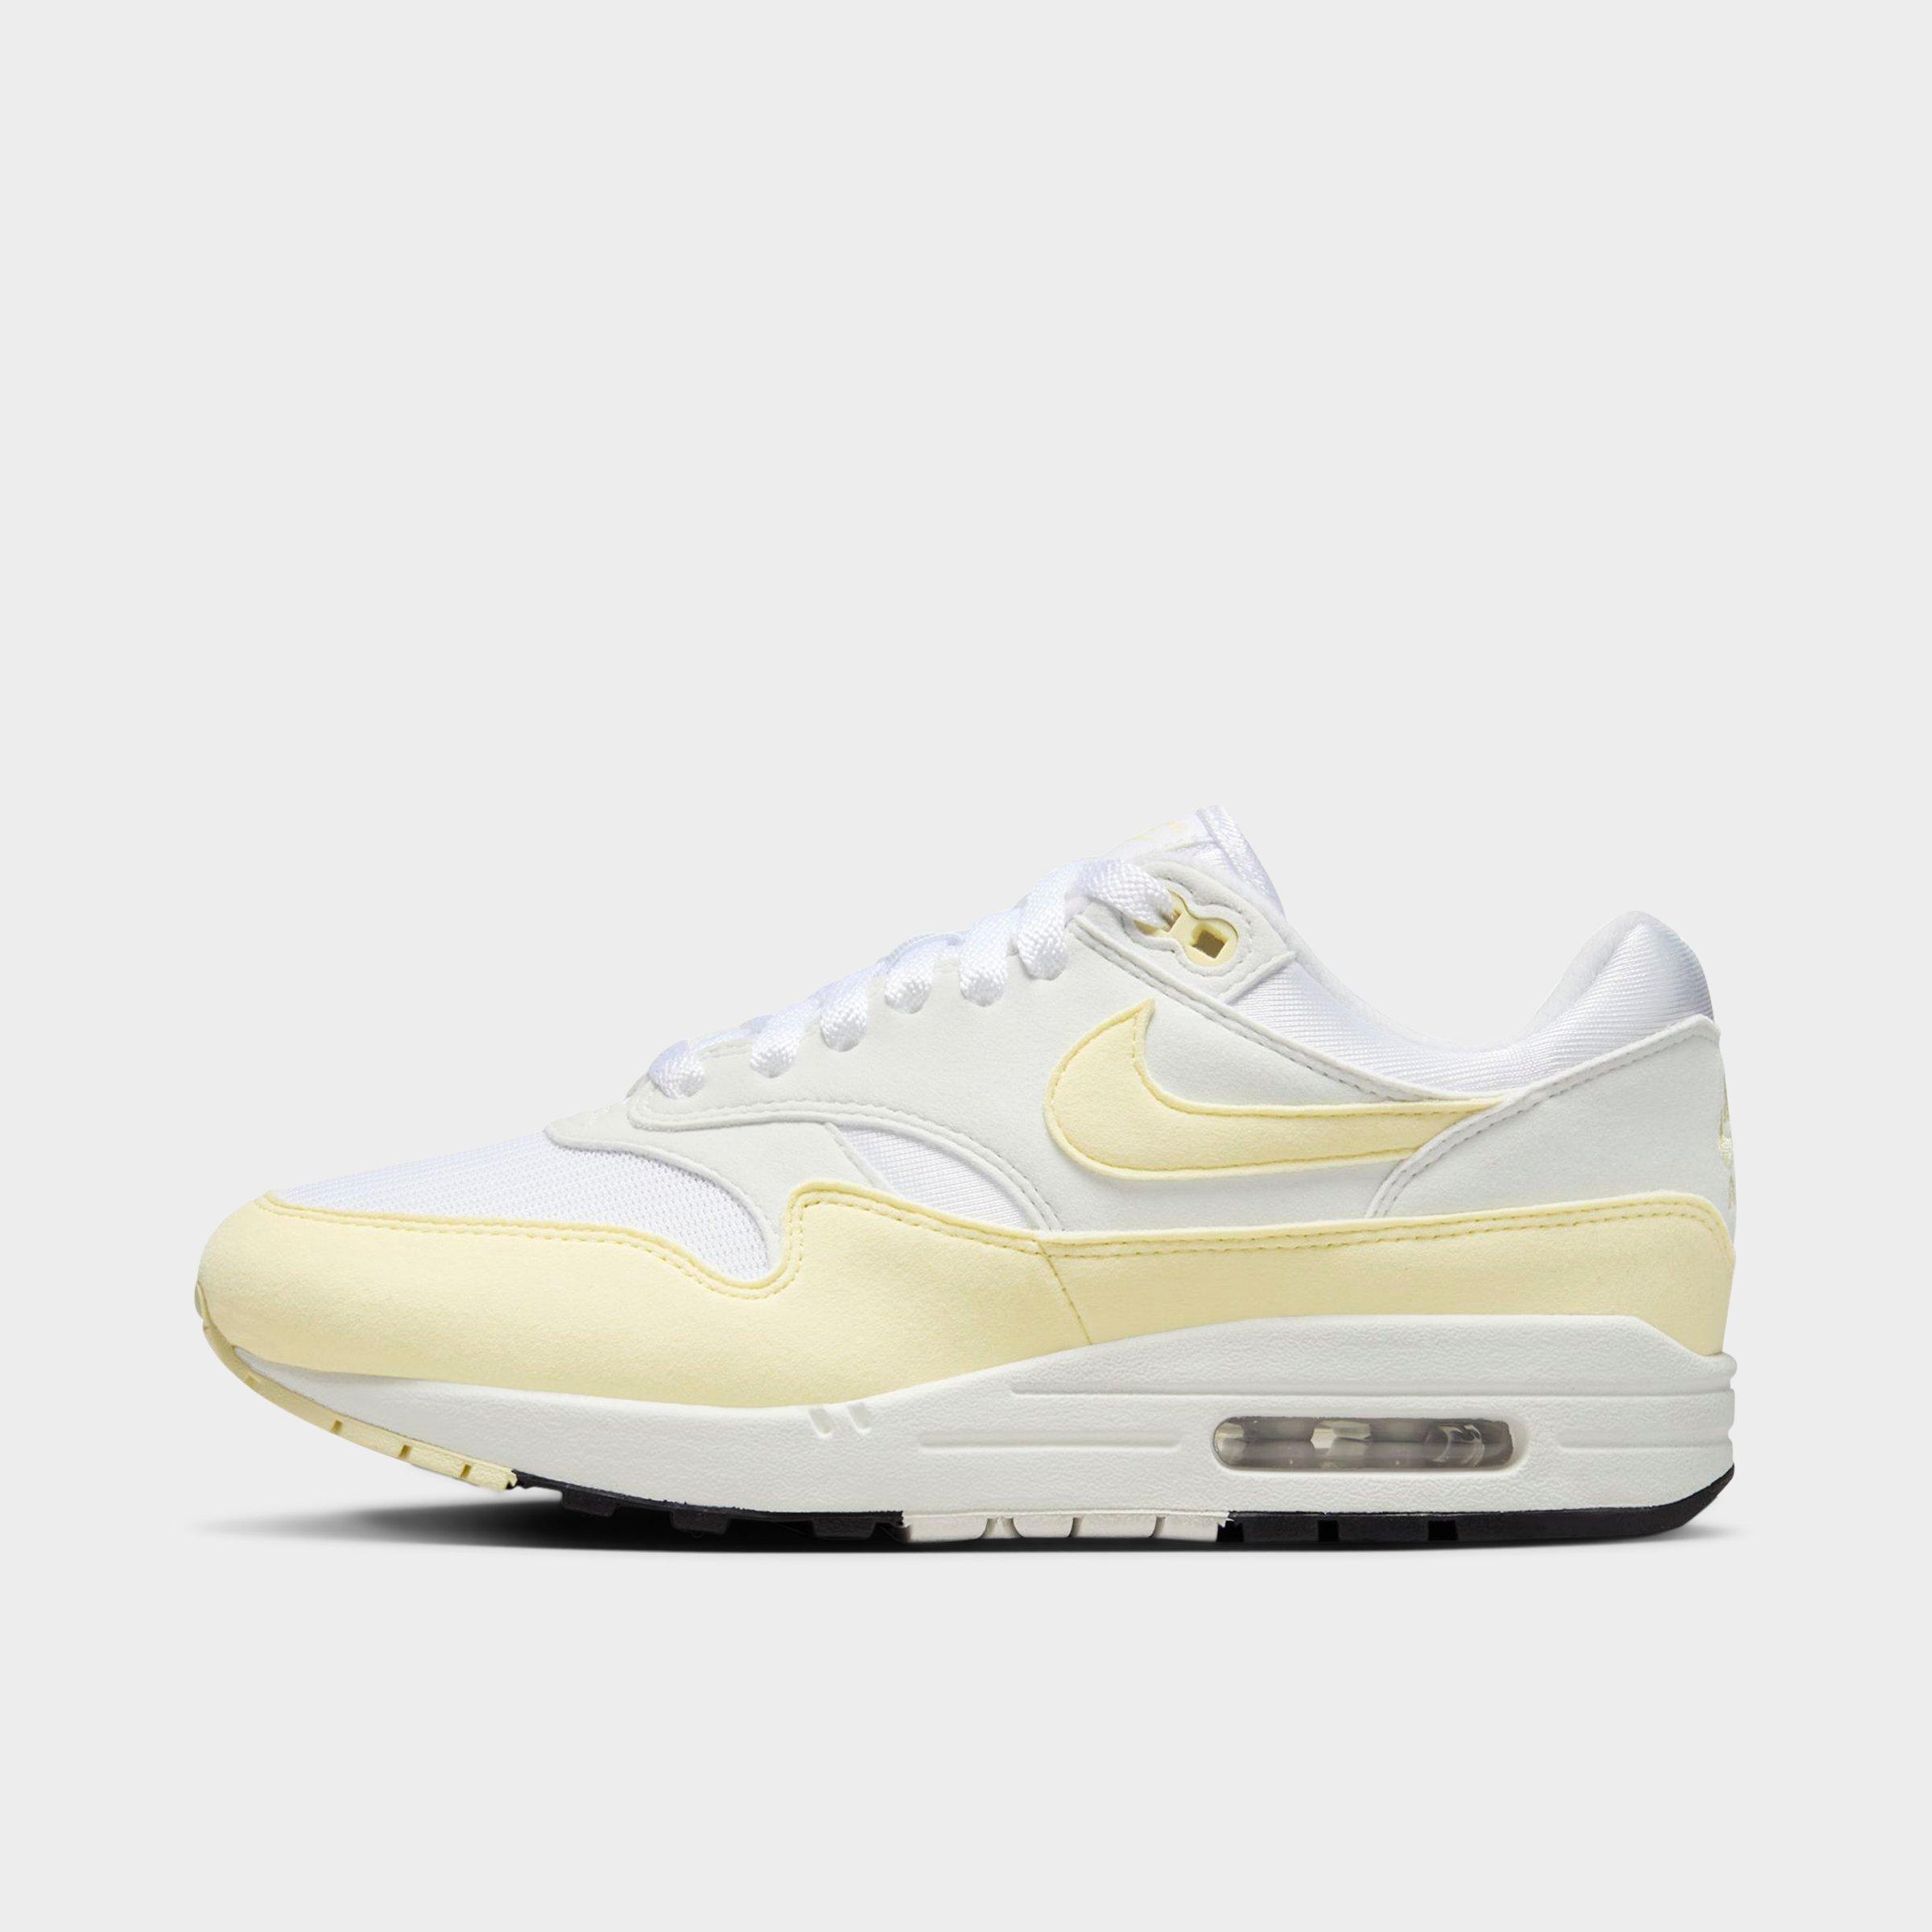 Shop Nike Women's Air Max 1 Casual Shoes In White/alabaster/summit White/black/